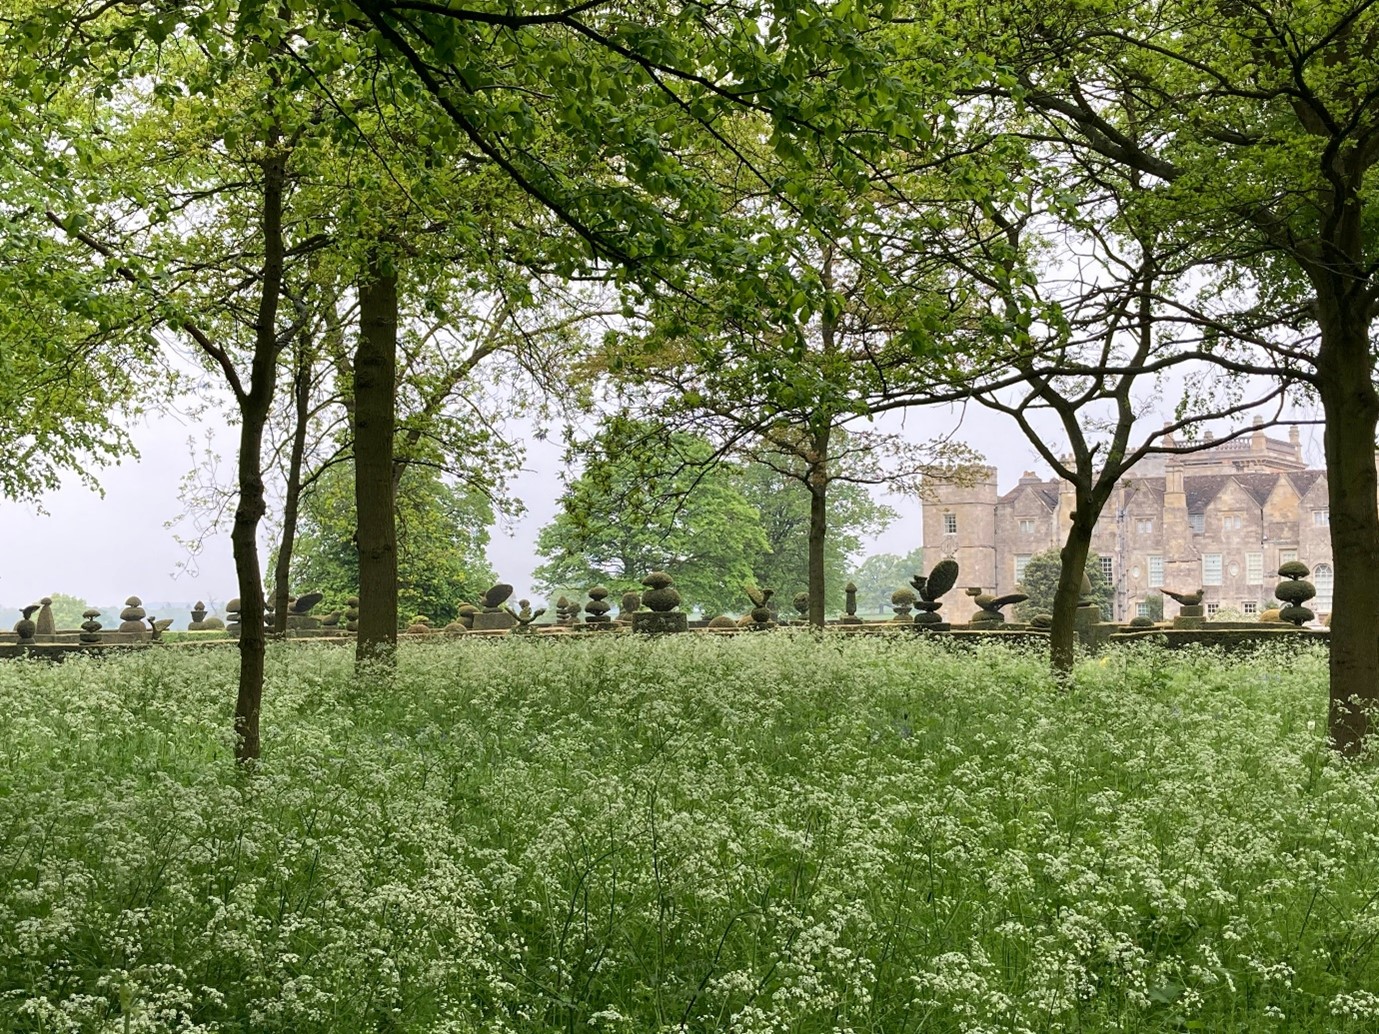 Billowing Anthriscus sylvestris, Cow Parsley softening the Topiary and Castle